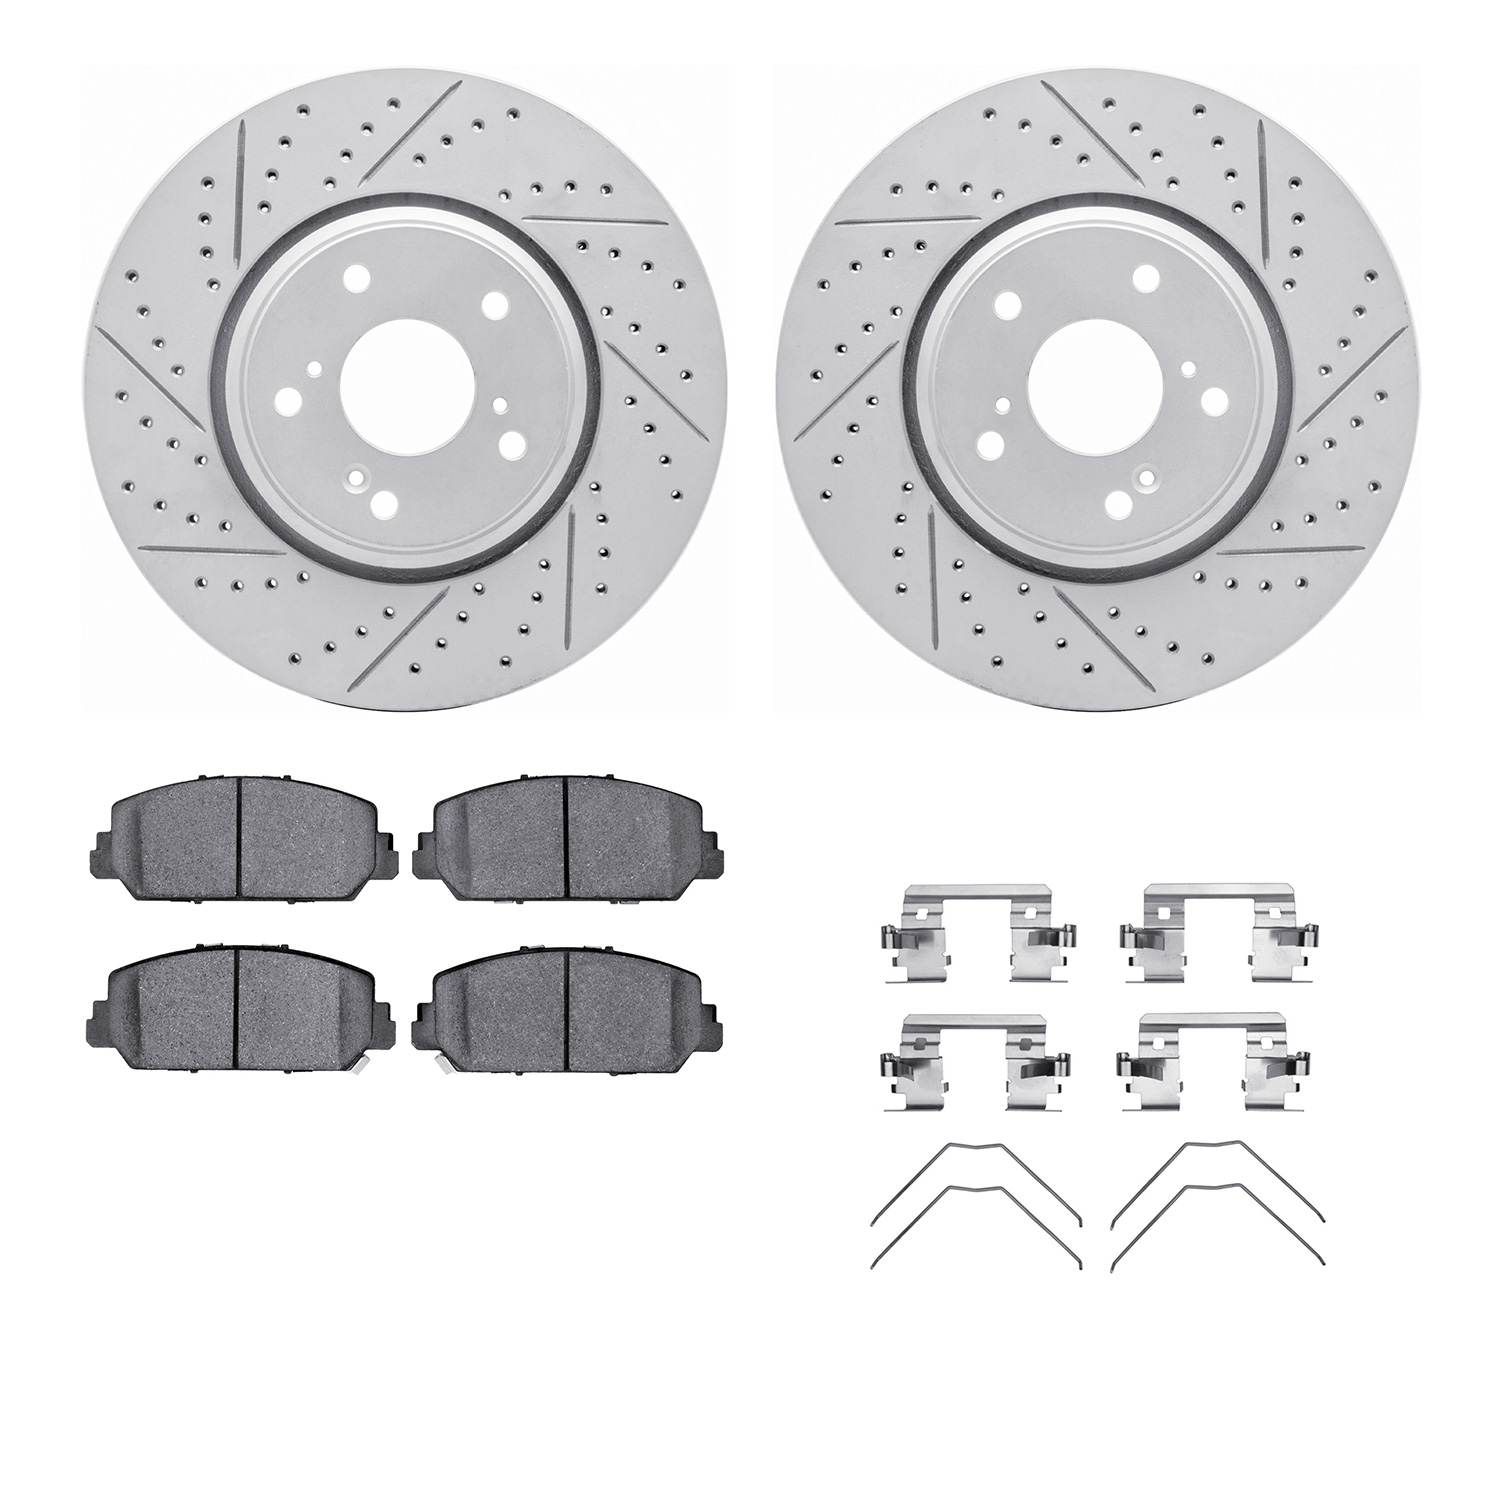 2512-59094 Geoperformance Drilled/Slotted Rotors w/5000 Advanced Brake Pads Kit & Hardware, Fits Select Acura/Honda, Position: F